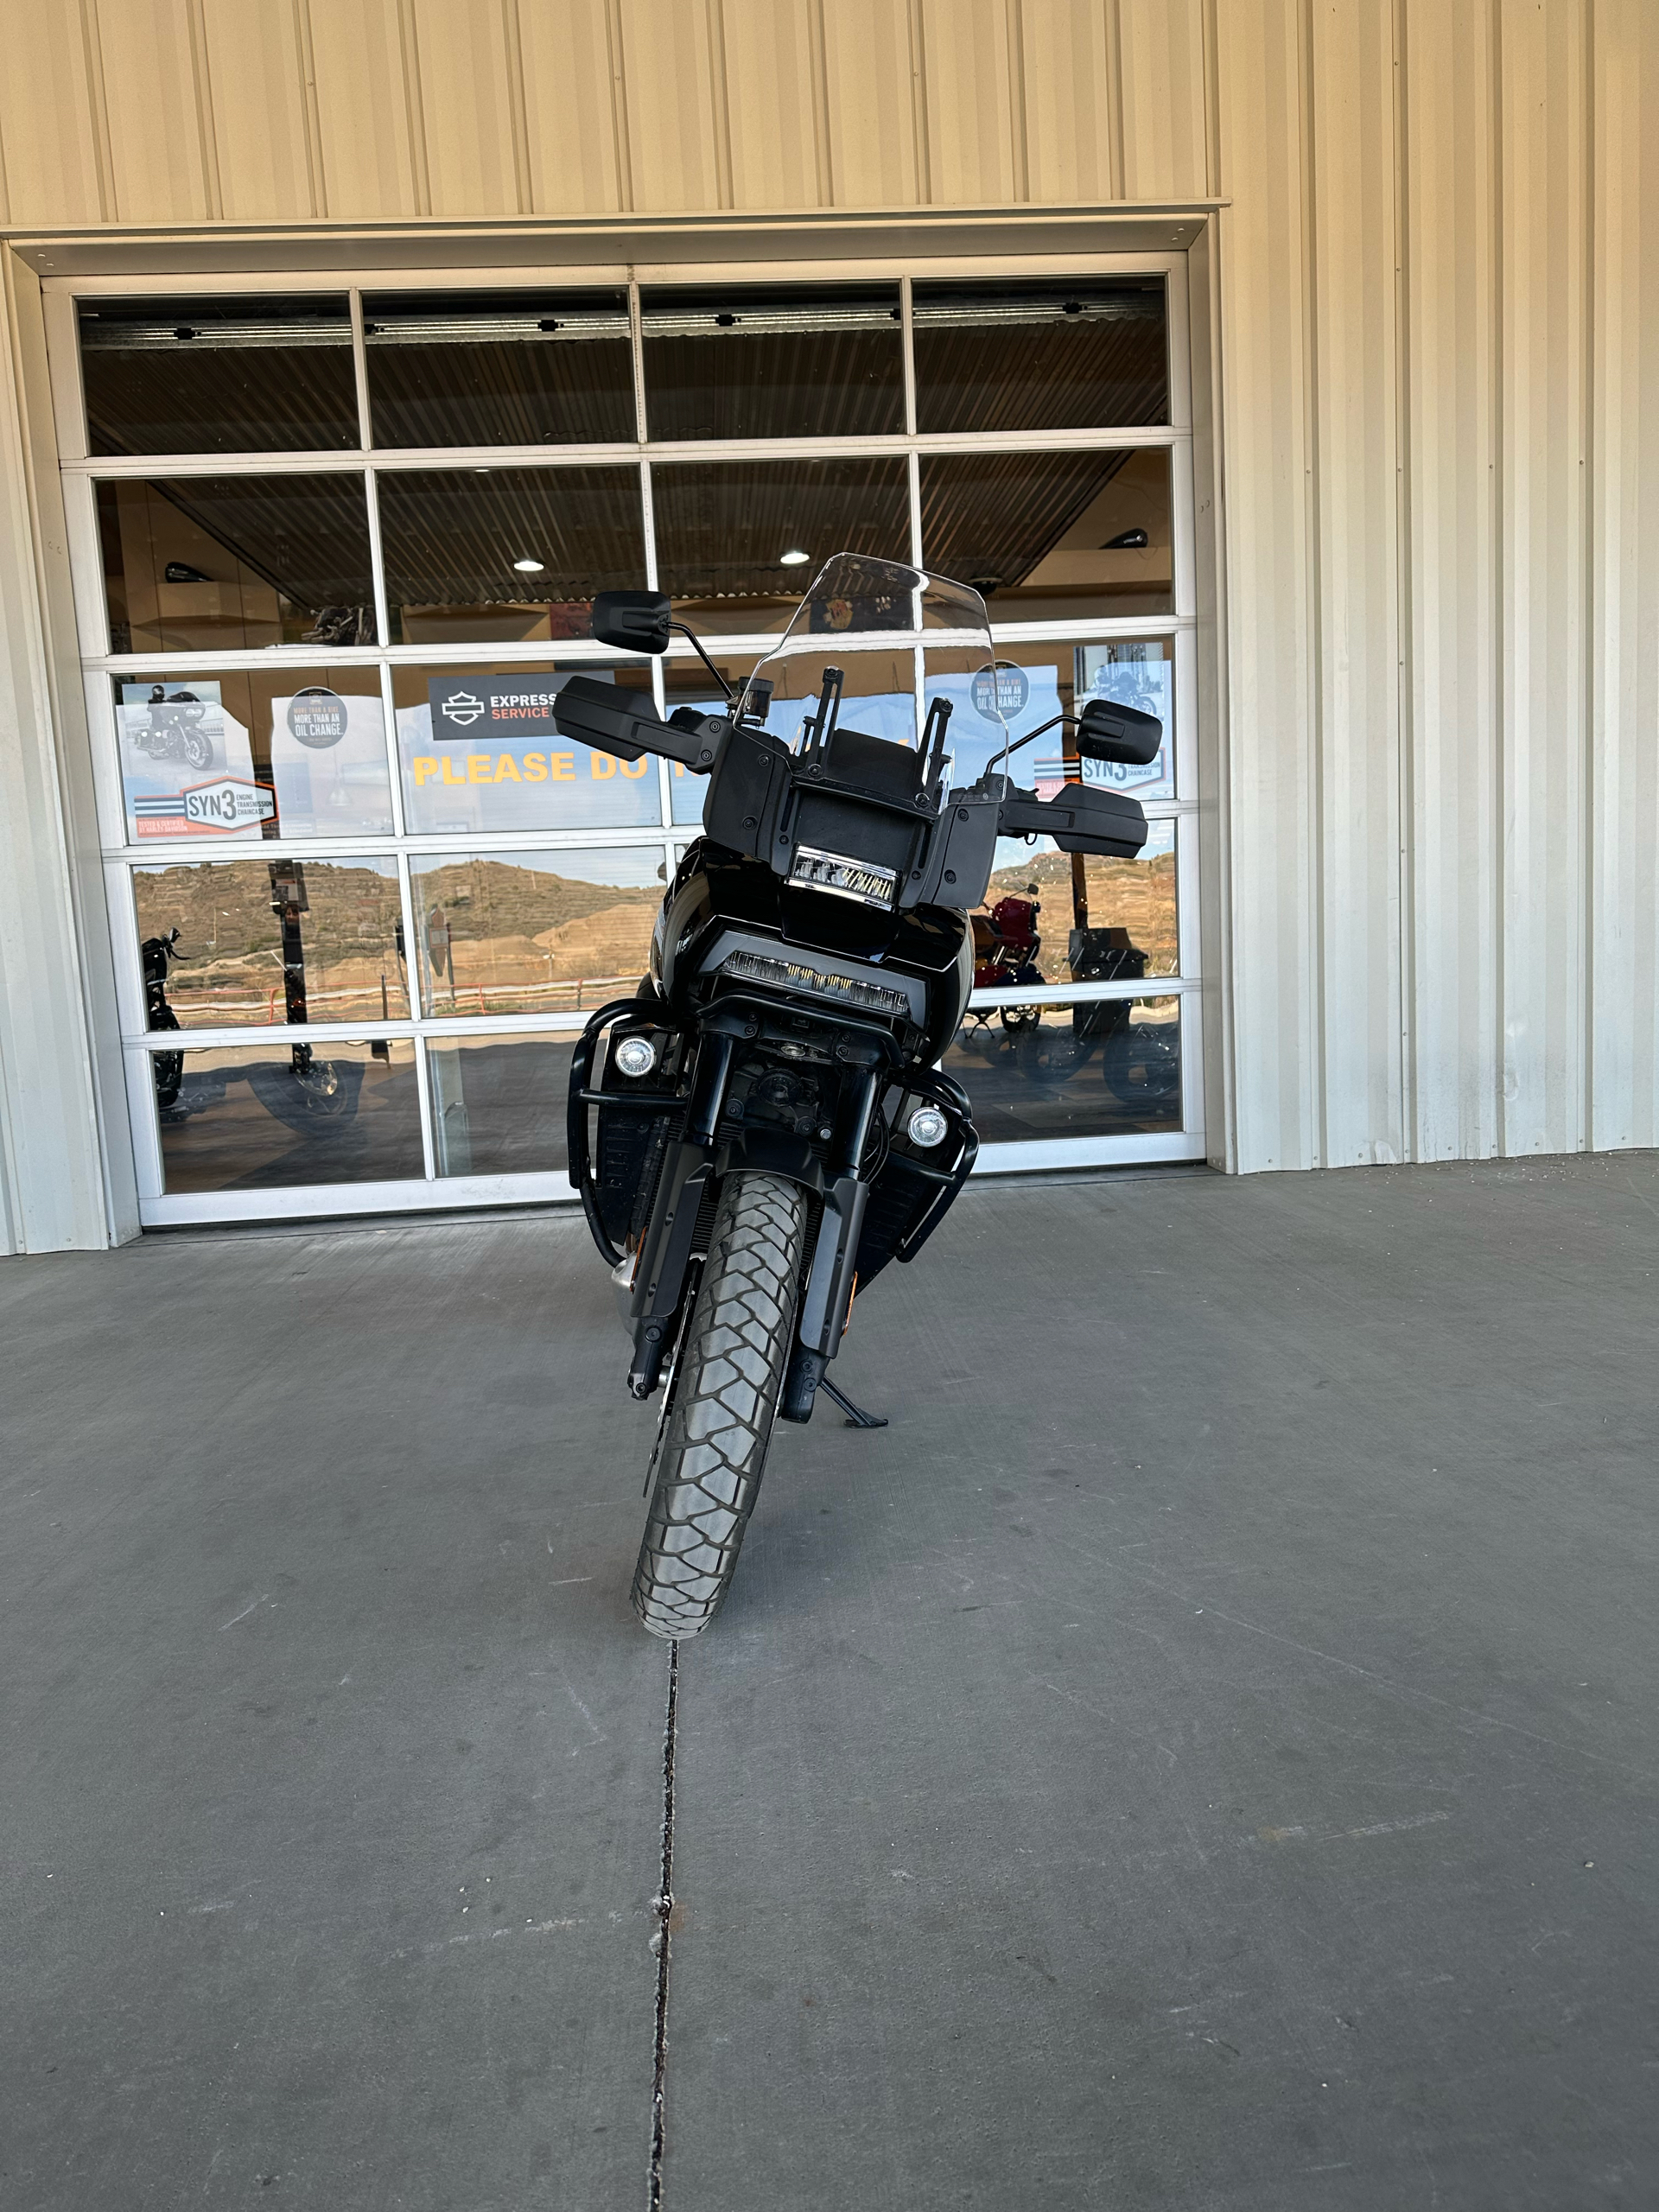 2022 Harley-Davidson Pan America 1250 Special (G.I. Enthusiast Collection) in Bellemont, Arizona - Photo 1